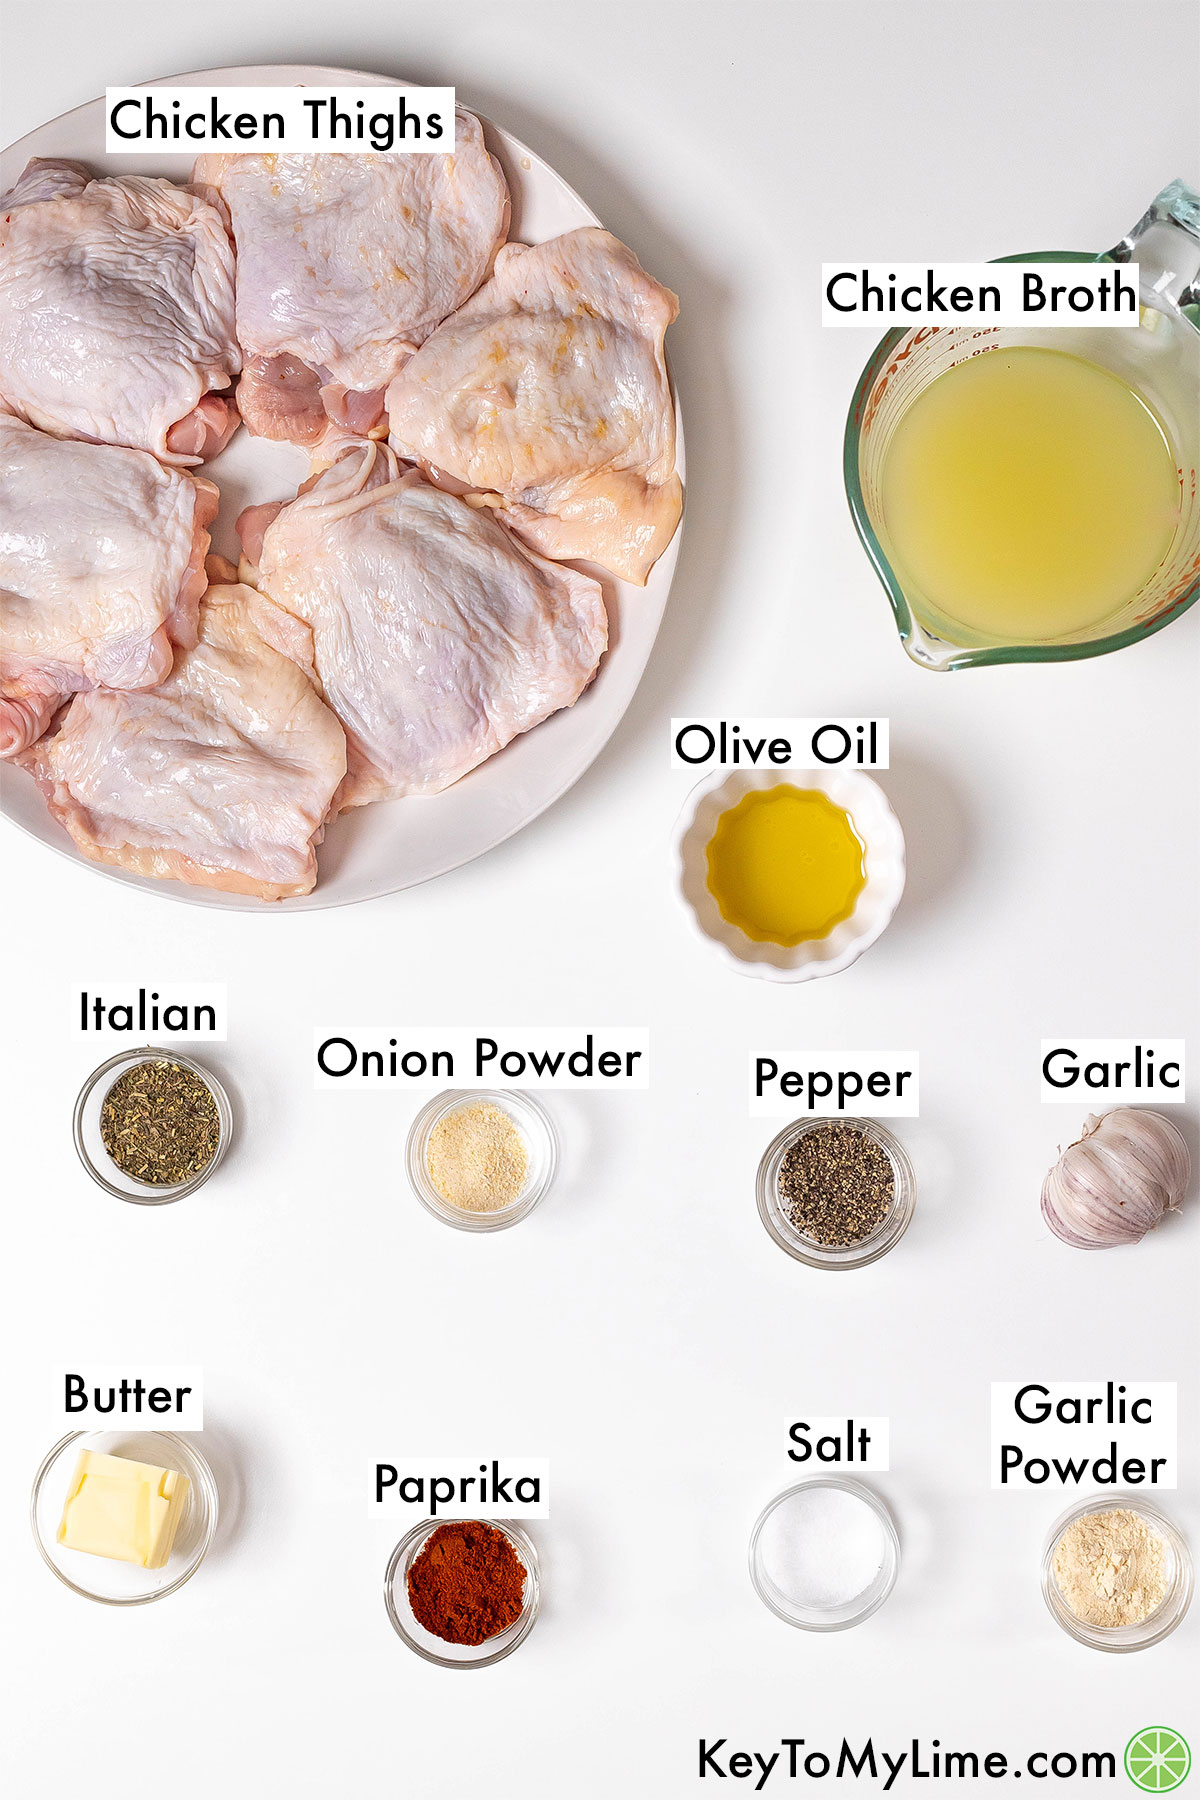 The labeled ingredients for Instant Pot chicken thighs.